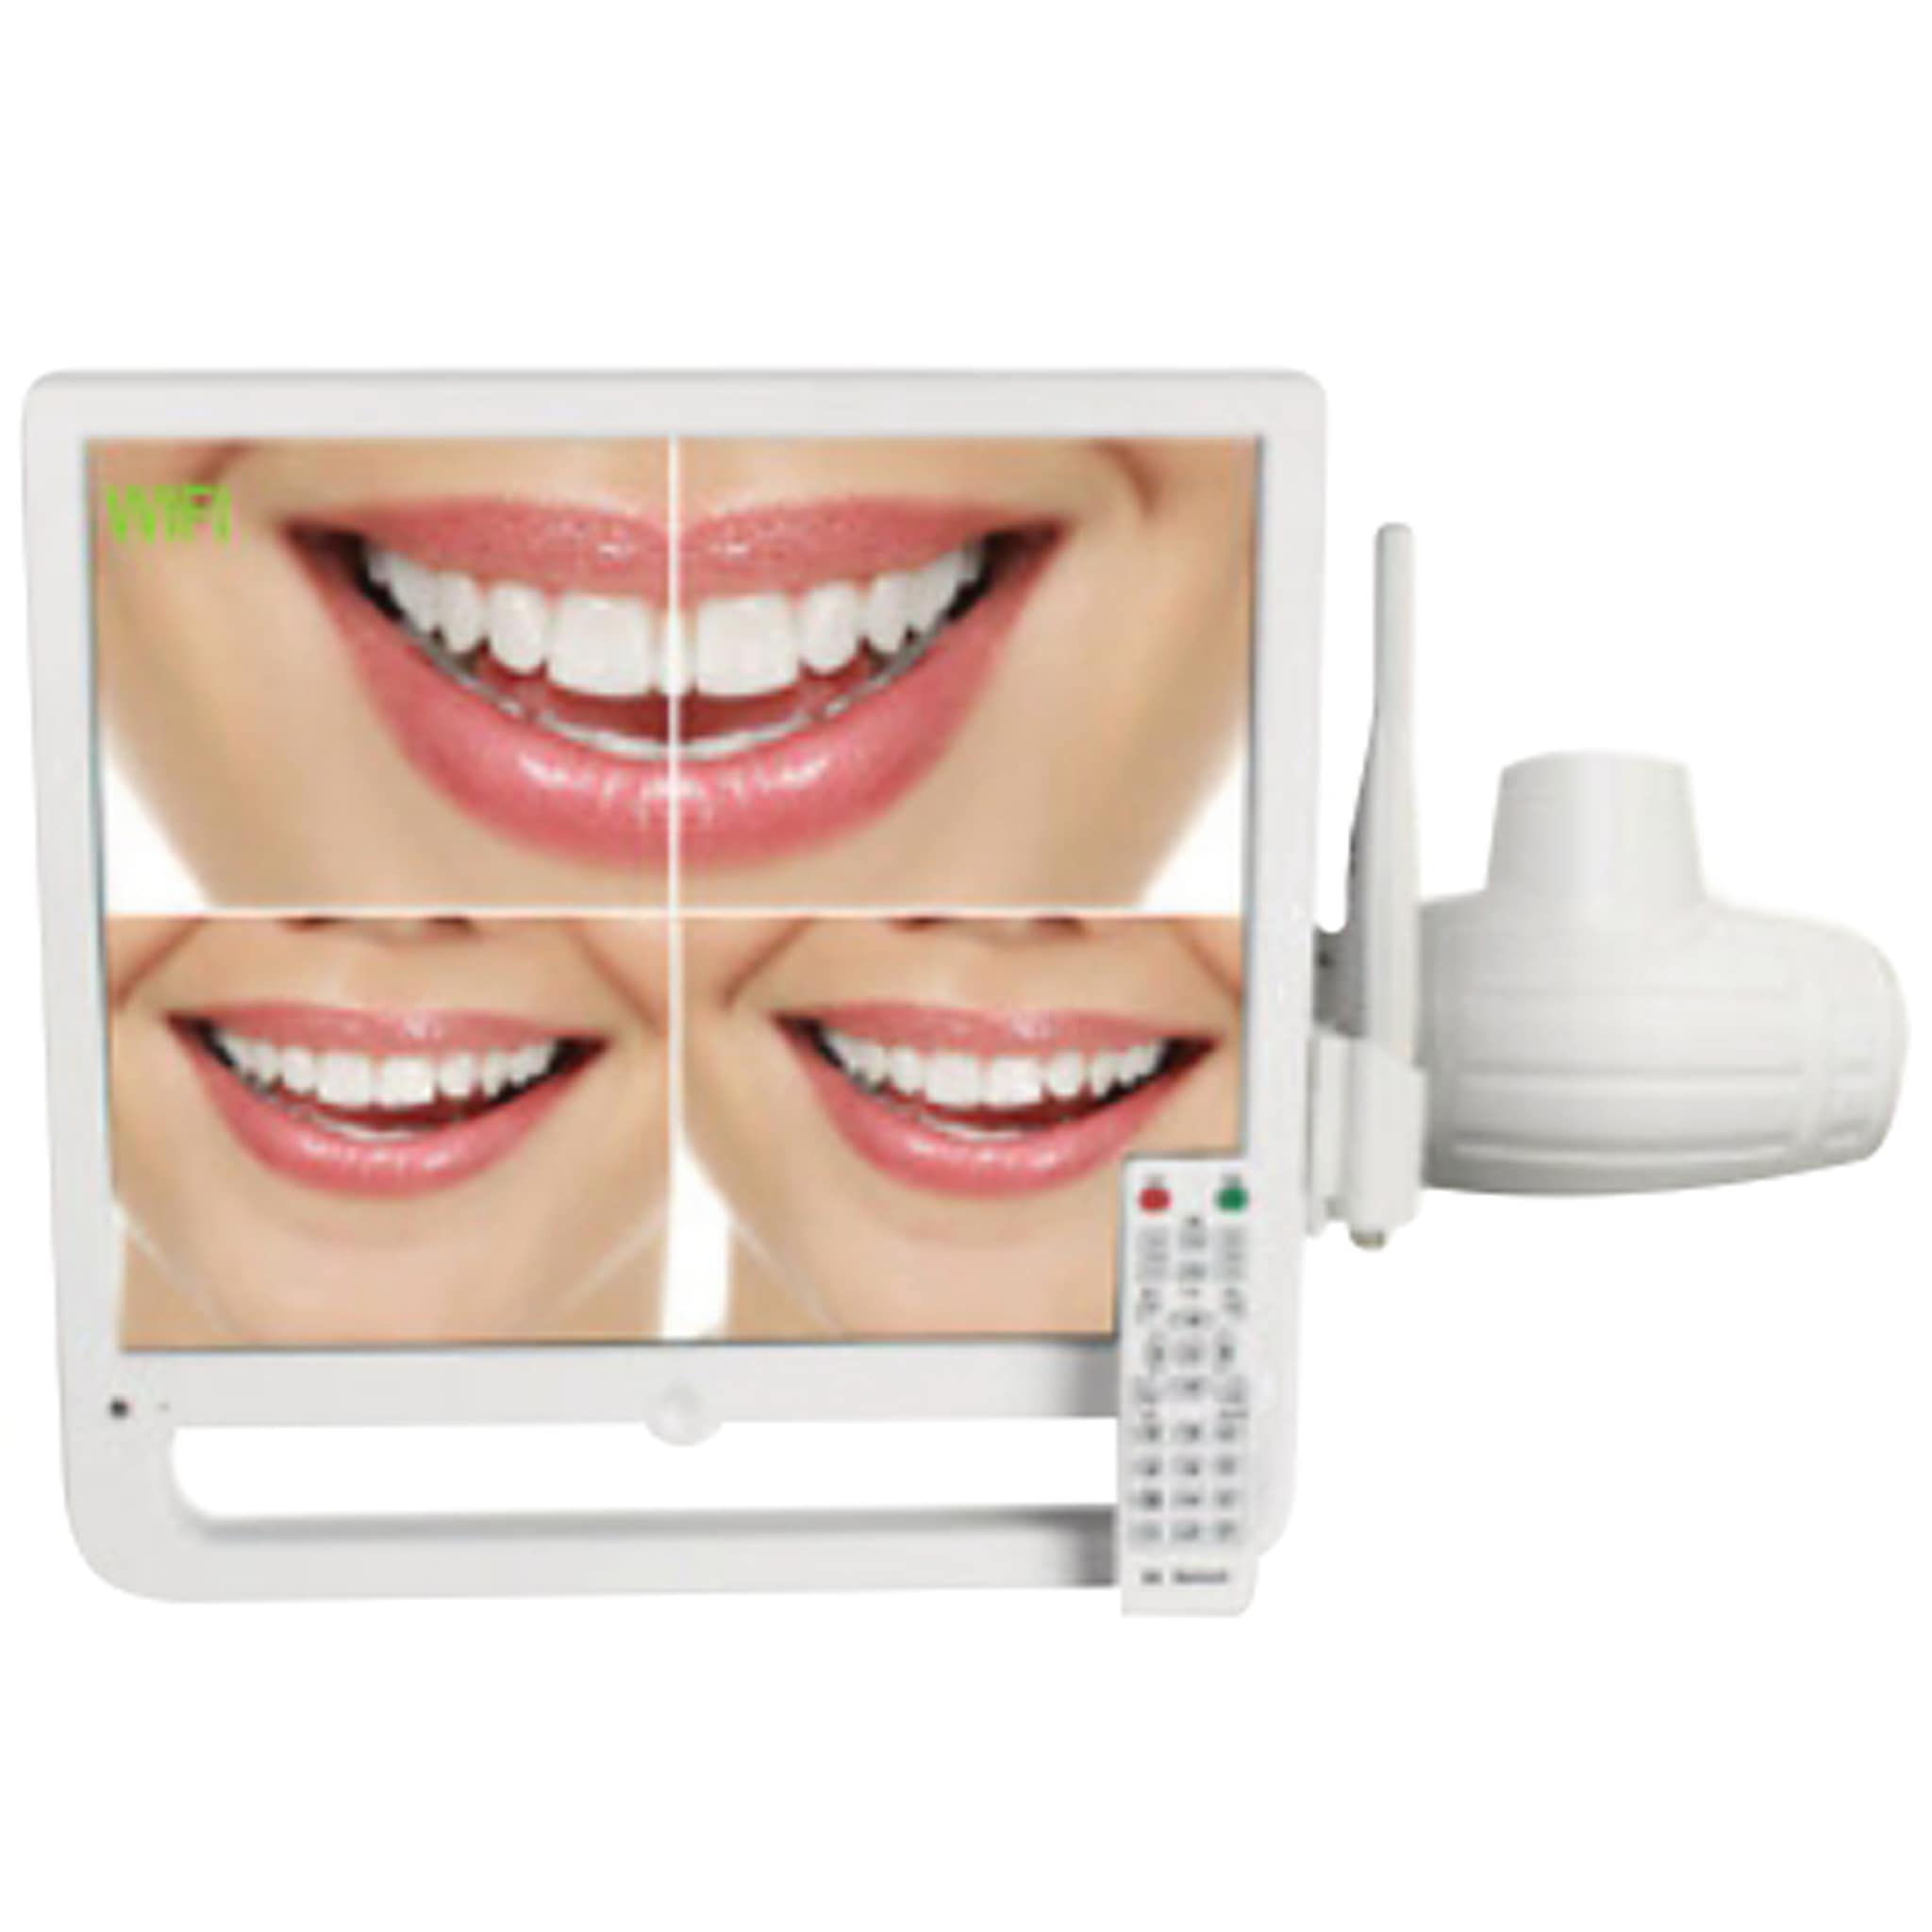 IDS Denmed Intra Oral Camera with Monitor HDI-999